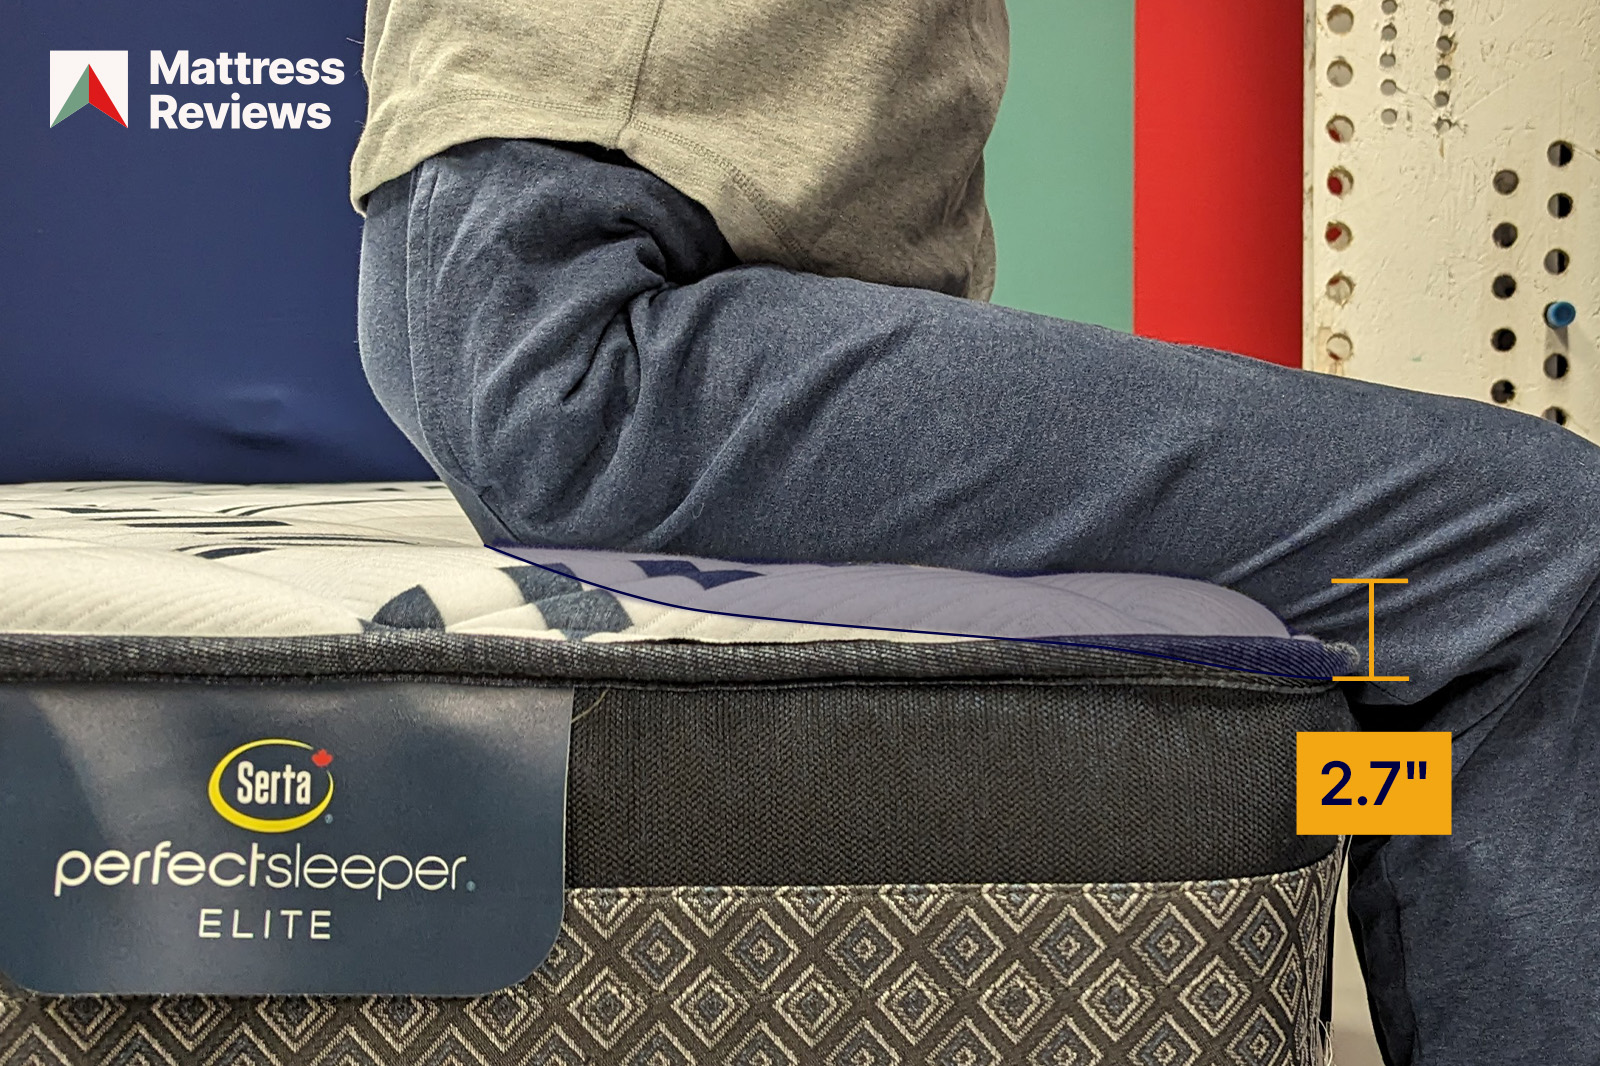 photo of a mannequin sitting on the edge of a Serta Perfect Sleeper Elite Percevall mattress, showing 2.7